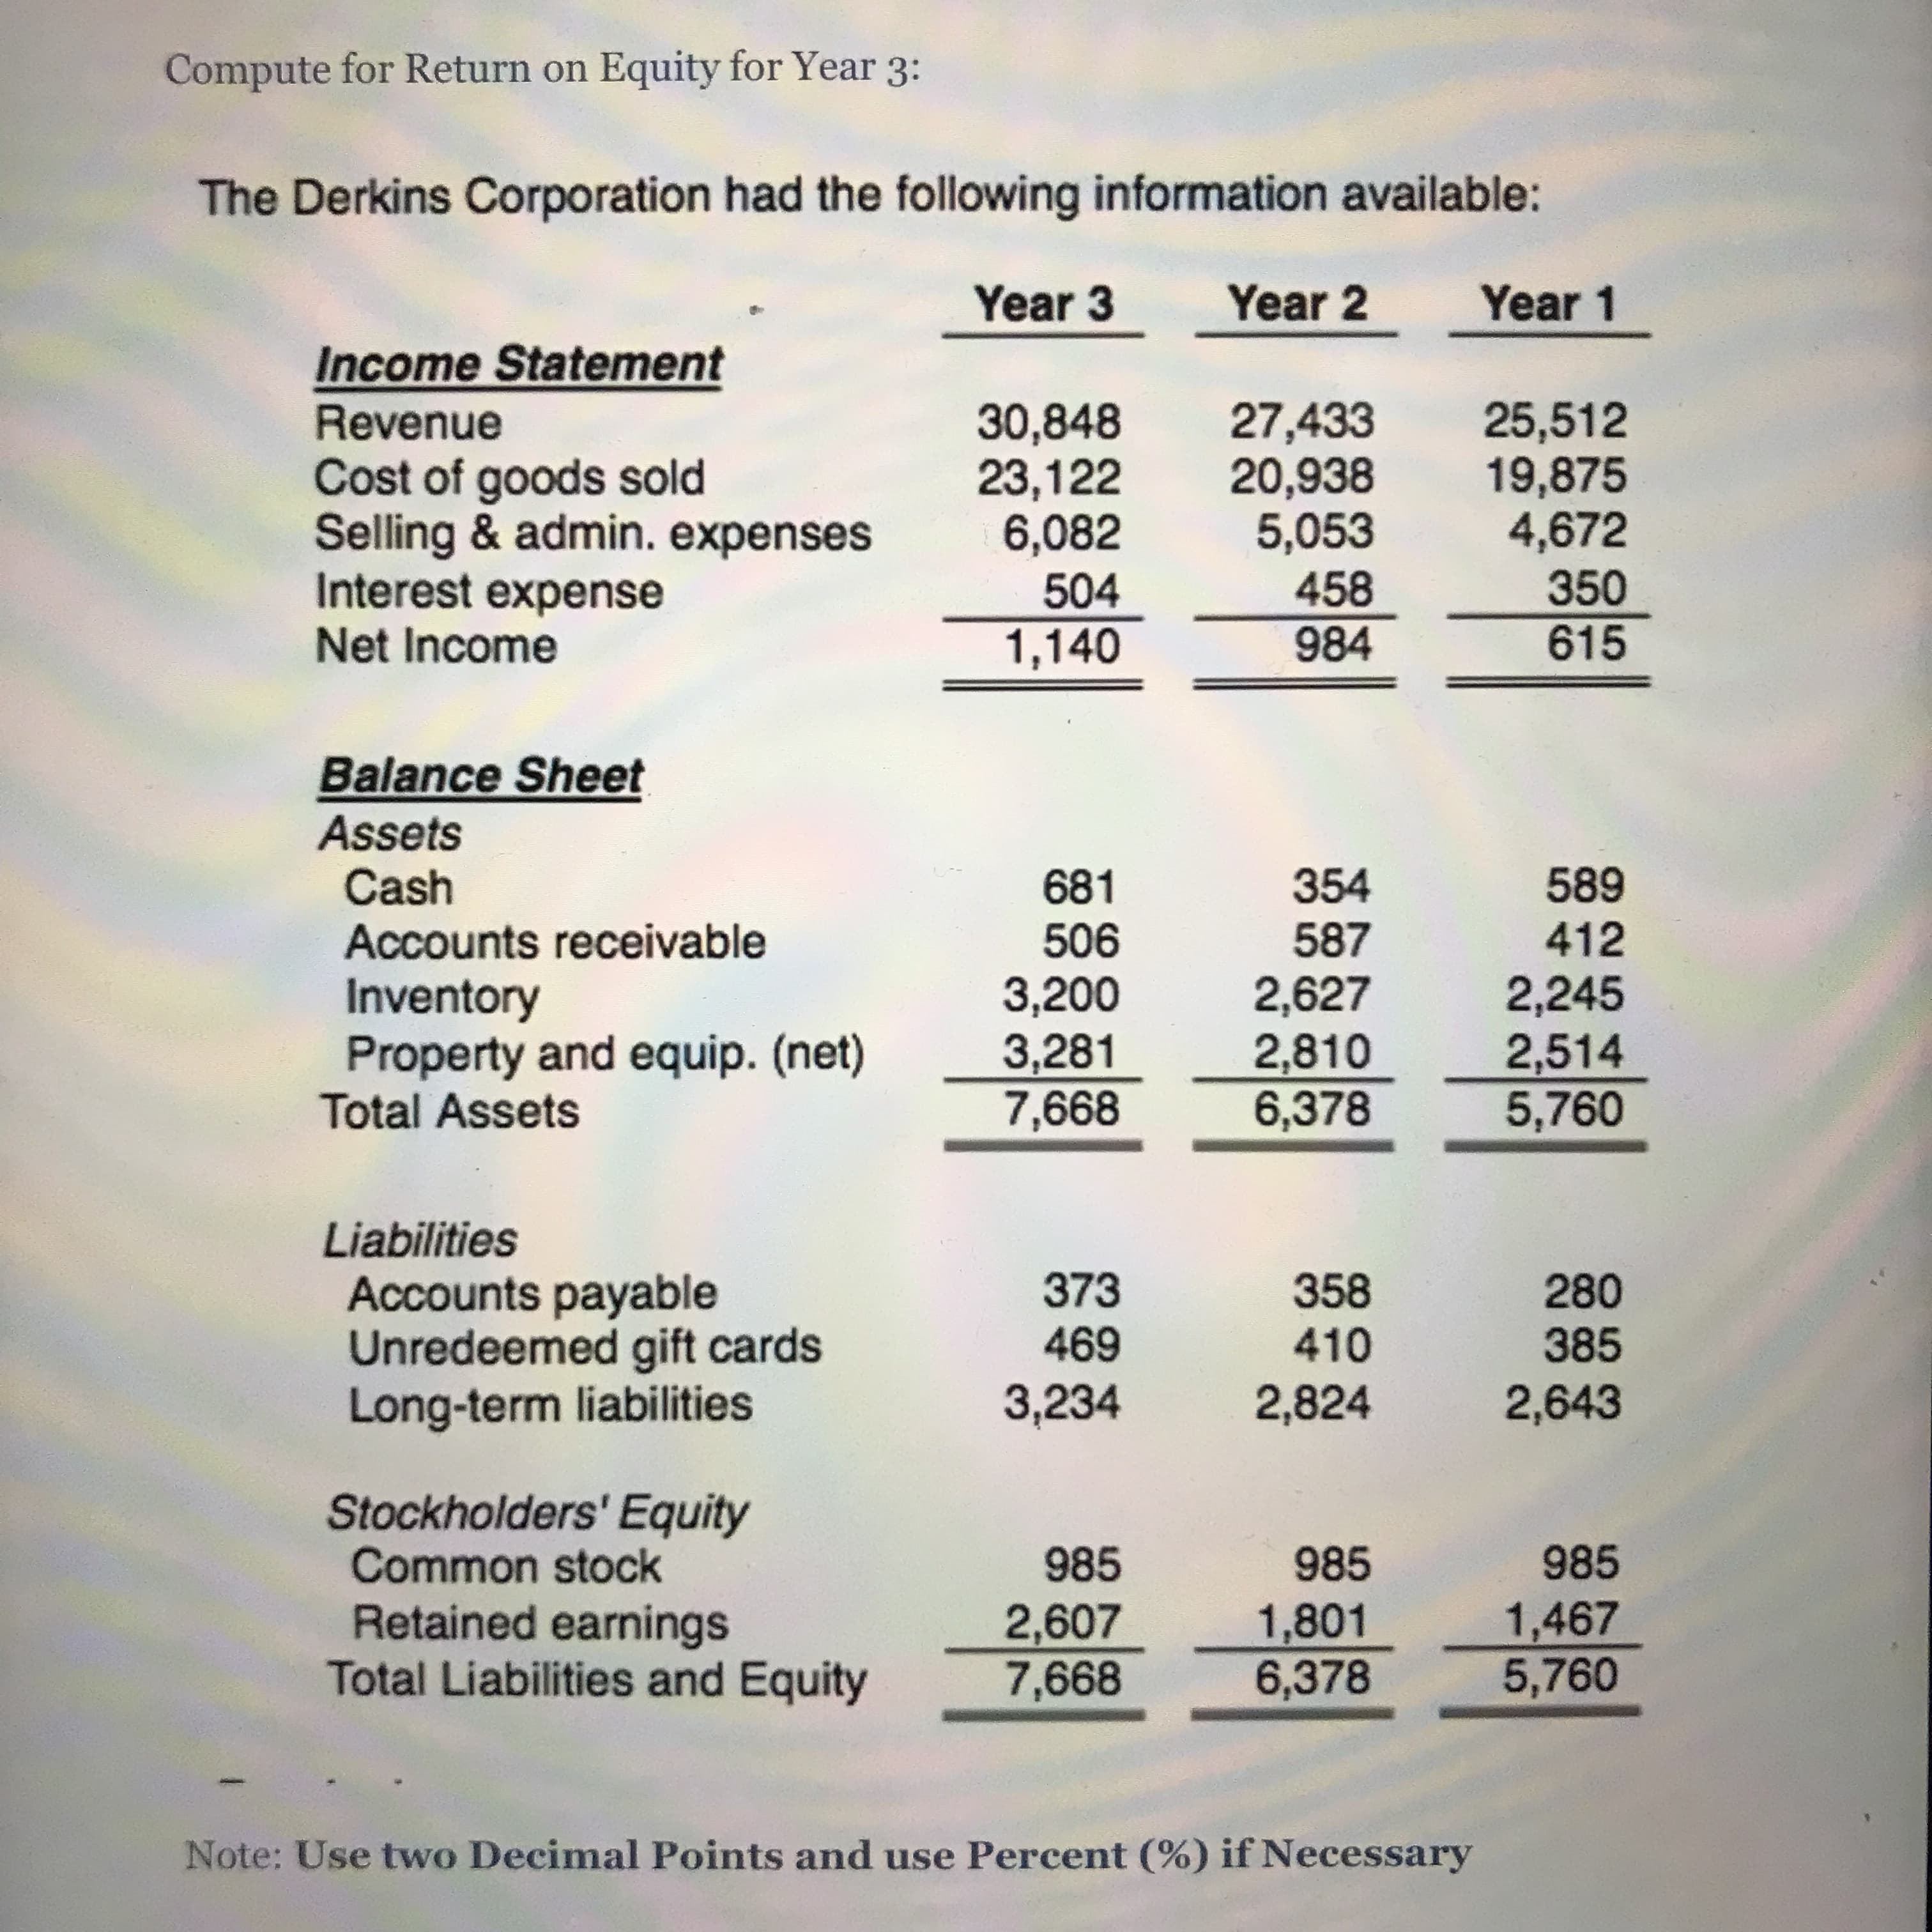 Compute for Return on Equity for Year 3:
The Derkins Corporation had the following information available:
Year 3
Year 2
Year 1
Income Statement
Revenue
Cost of goods sold
Selling & admin. expenses
Interest expense
Net Income
30,848
23,122
6,082
27,433
20,938
5,053
458
25,512
19,875
4,672
504
1,140
984
615
Balance Sheet
Assets
Cash
Accounts receivable
Inventory
Property and equip. (net)
Total Assets
681
354
587
412
909
3,200
3,281
7,668
2,627
2,810
6,378
2,245
2,514
Liabilities
Accounts payable
Unredeemed gift cards
373
358
410
280
385
Long-term liabilities
3,234
2,824
2,643
Stockholders' Equity
Common stock
Retained earnings
Total Liabilities and Equity
985
985
985
2,607
7,668
1,801
6,378
1,467
5,760
Note: Use two Decimal Points and use Percent (%) if Necessary
